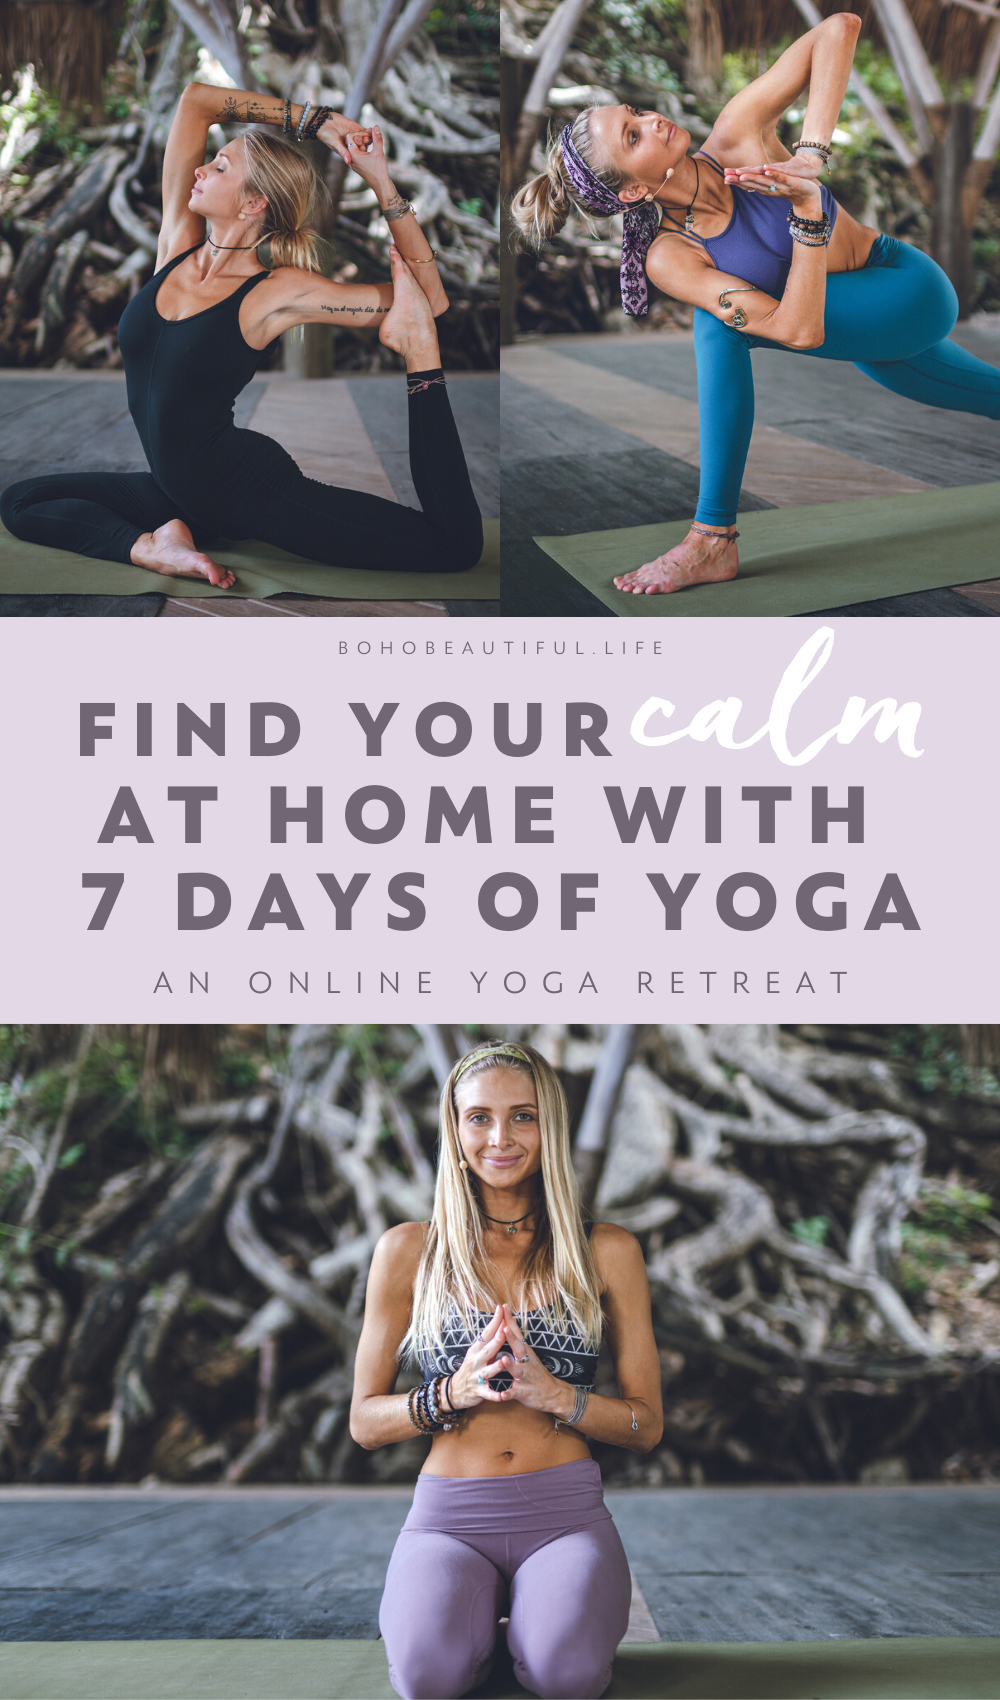 Find Your Calm with 7 Days of Yoga, Meditation  Journaling Prompts | Boho Beautiful Retreat - Find Your Calm with 7 Days of Yoga, Meditation  Journaling Prompts | Boho Beautiful Retreat -   14 fitness Challenge yoga ideas